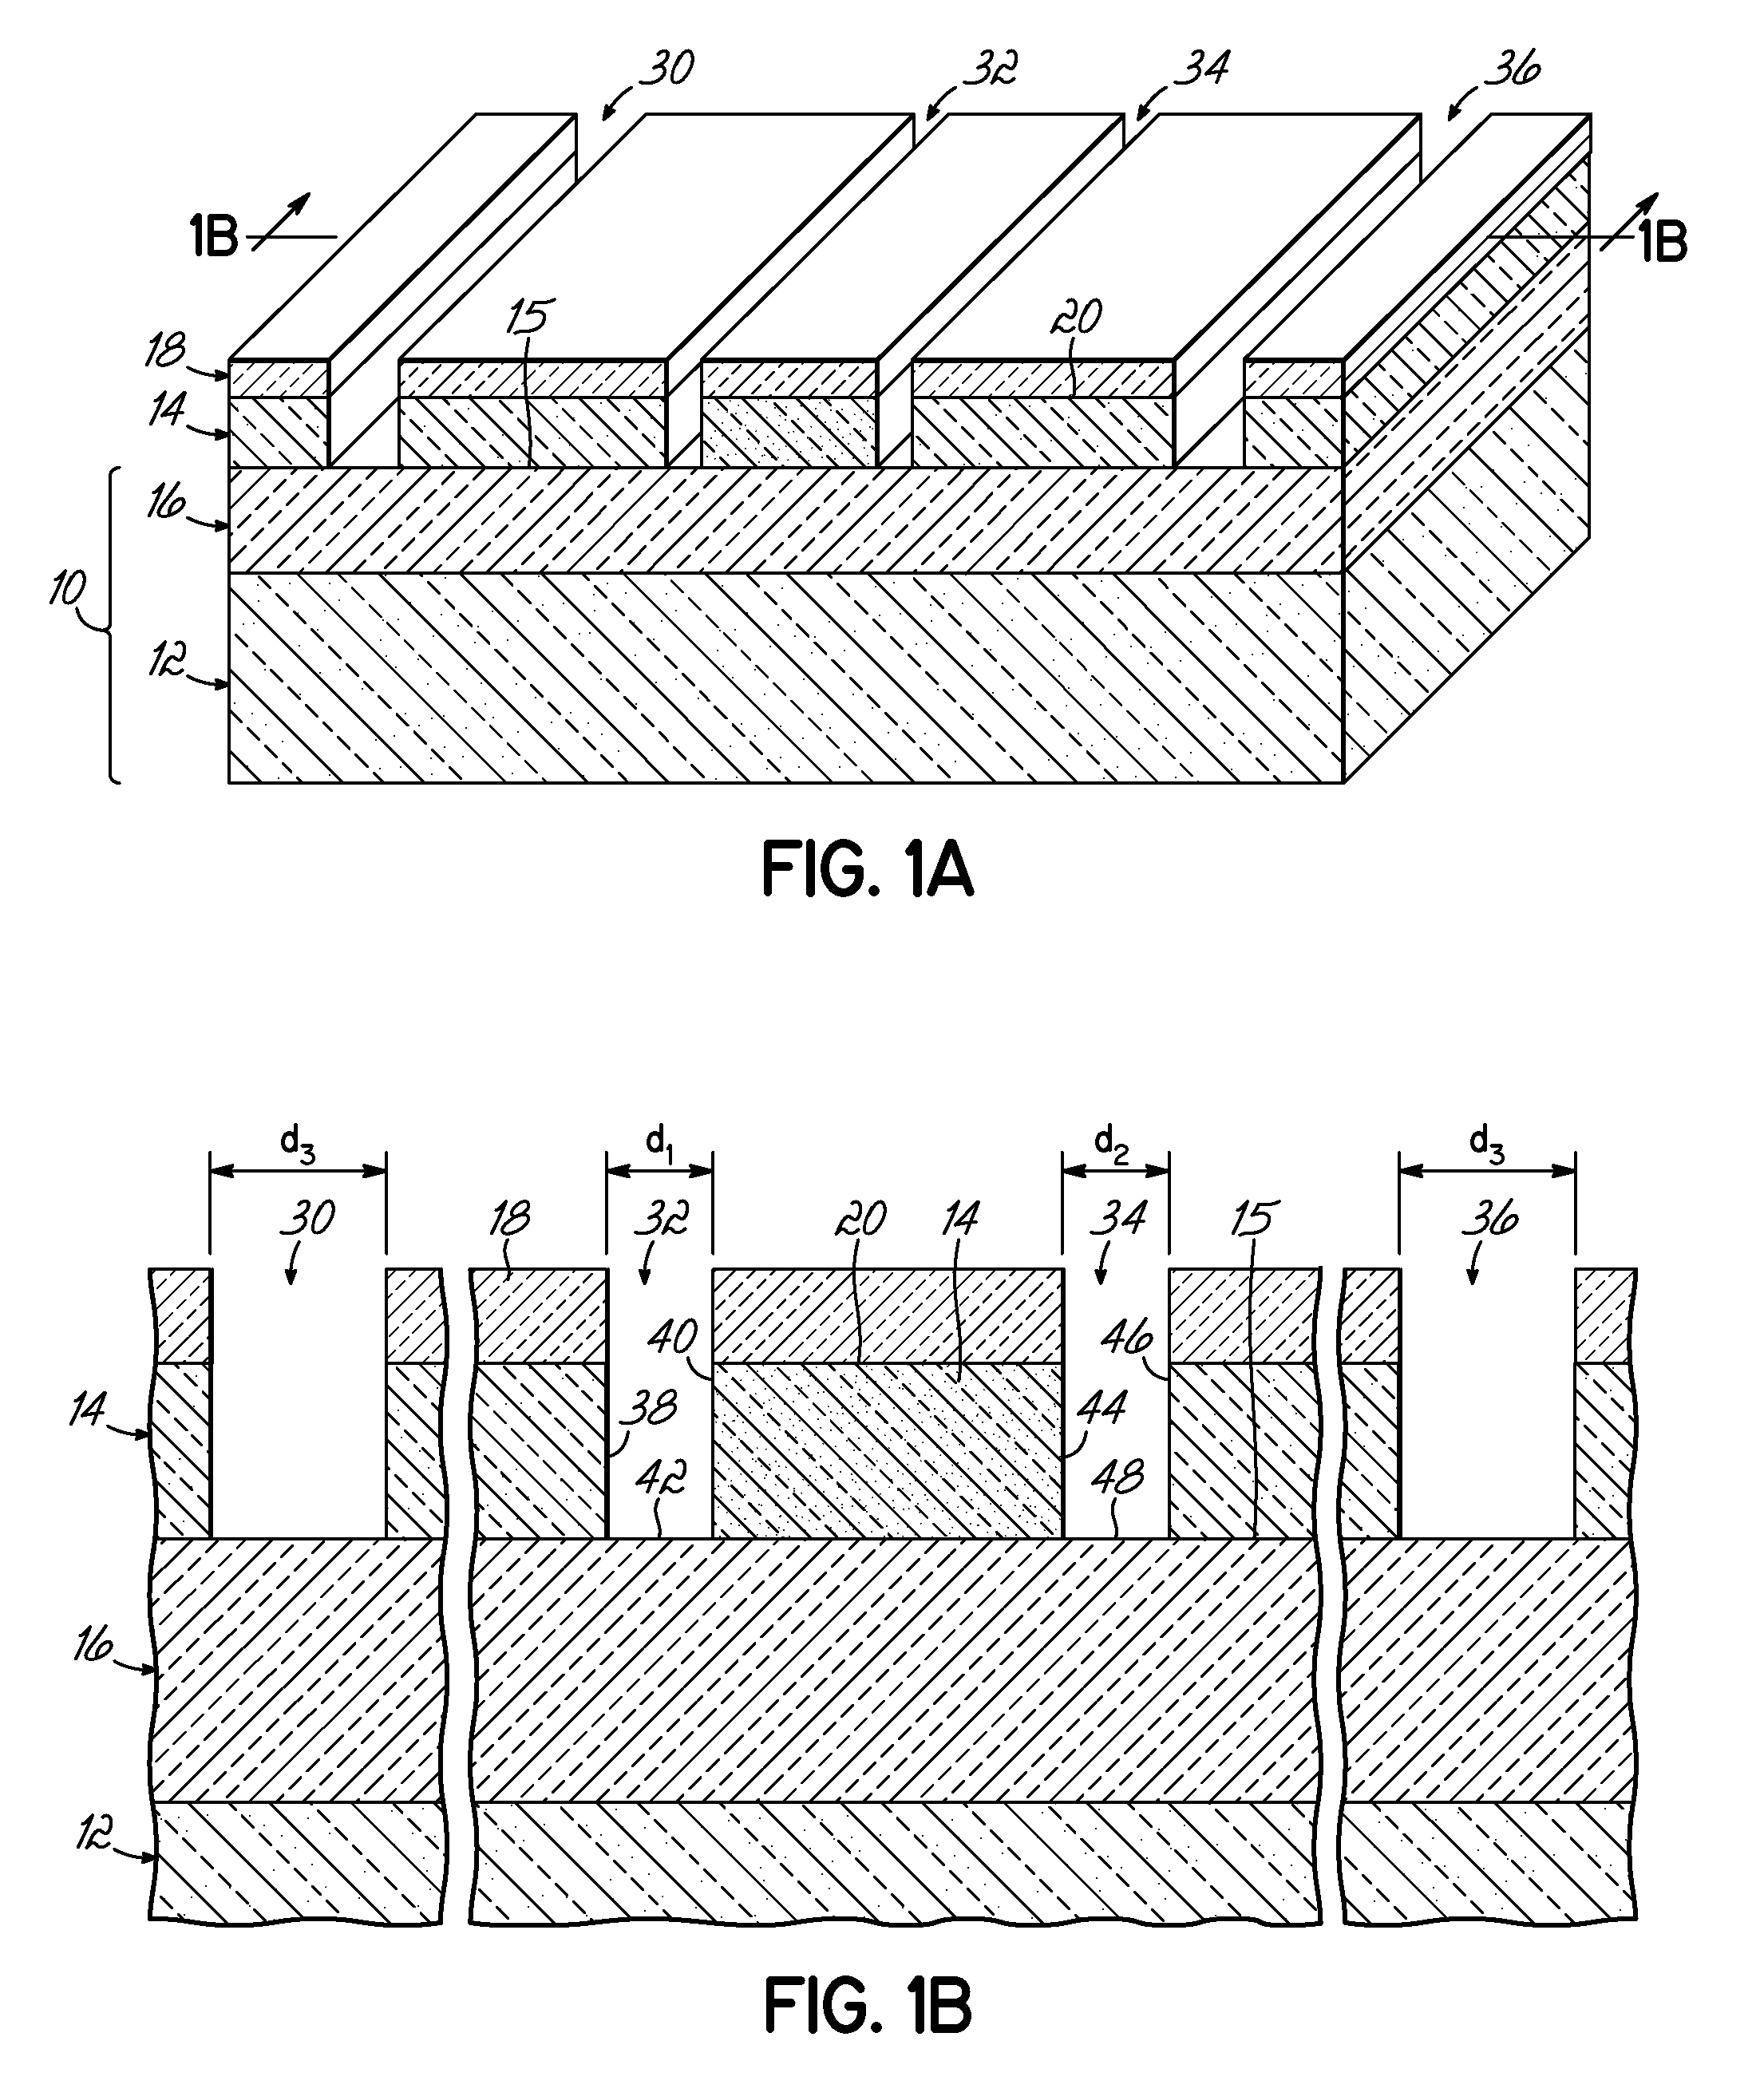 Design structures for high-voltage integrated circuits